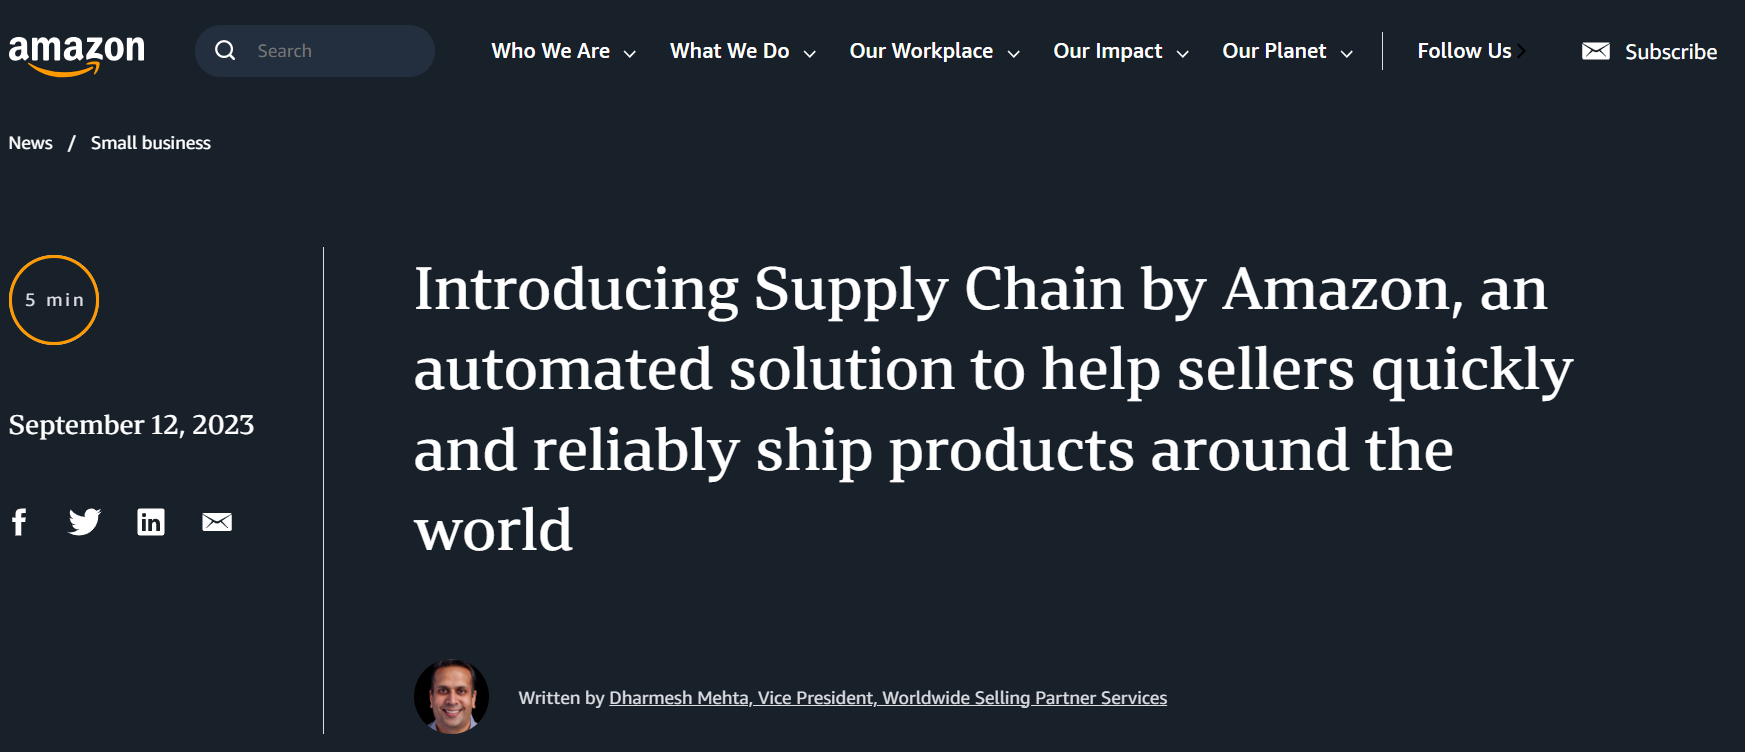 Supply Chain by Amazon